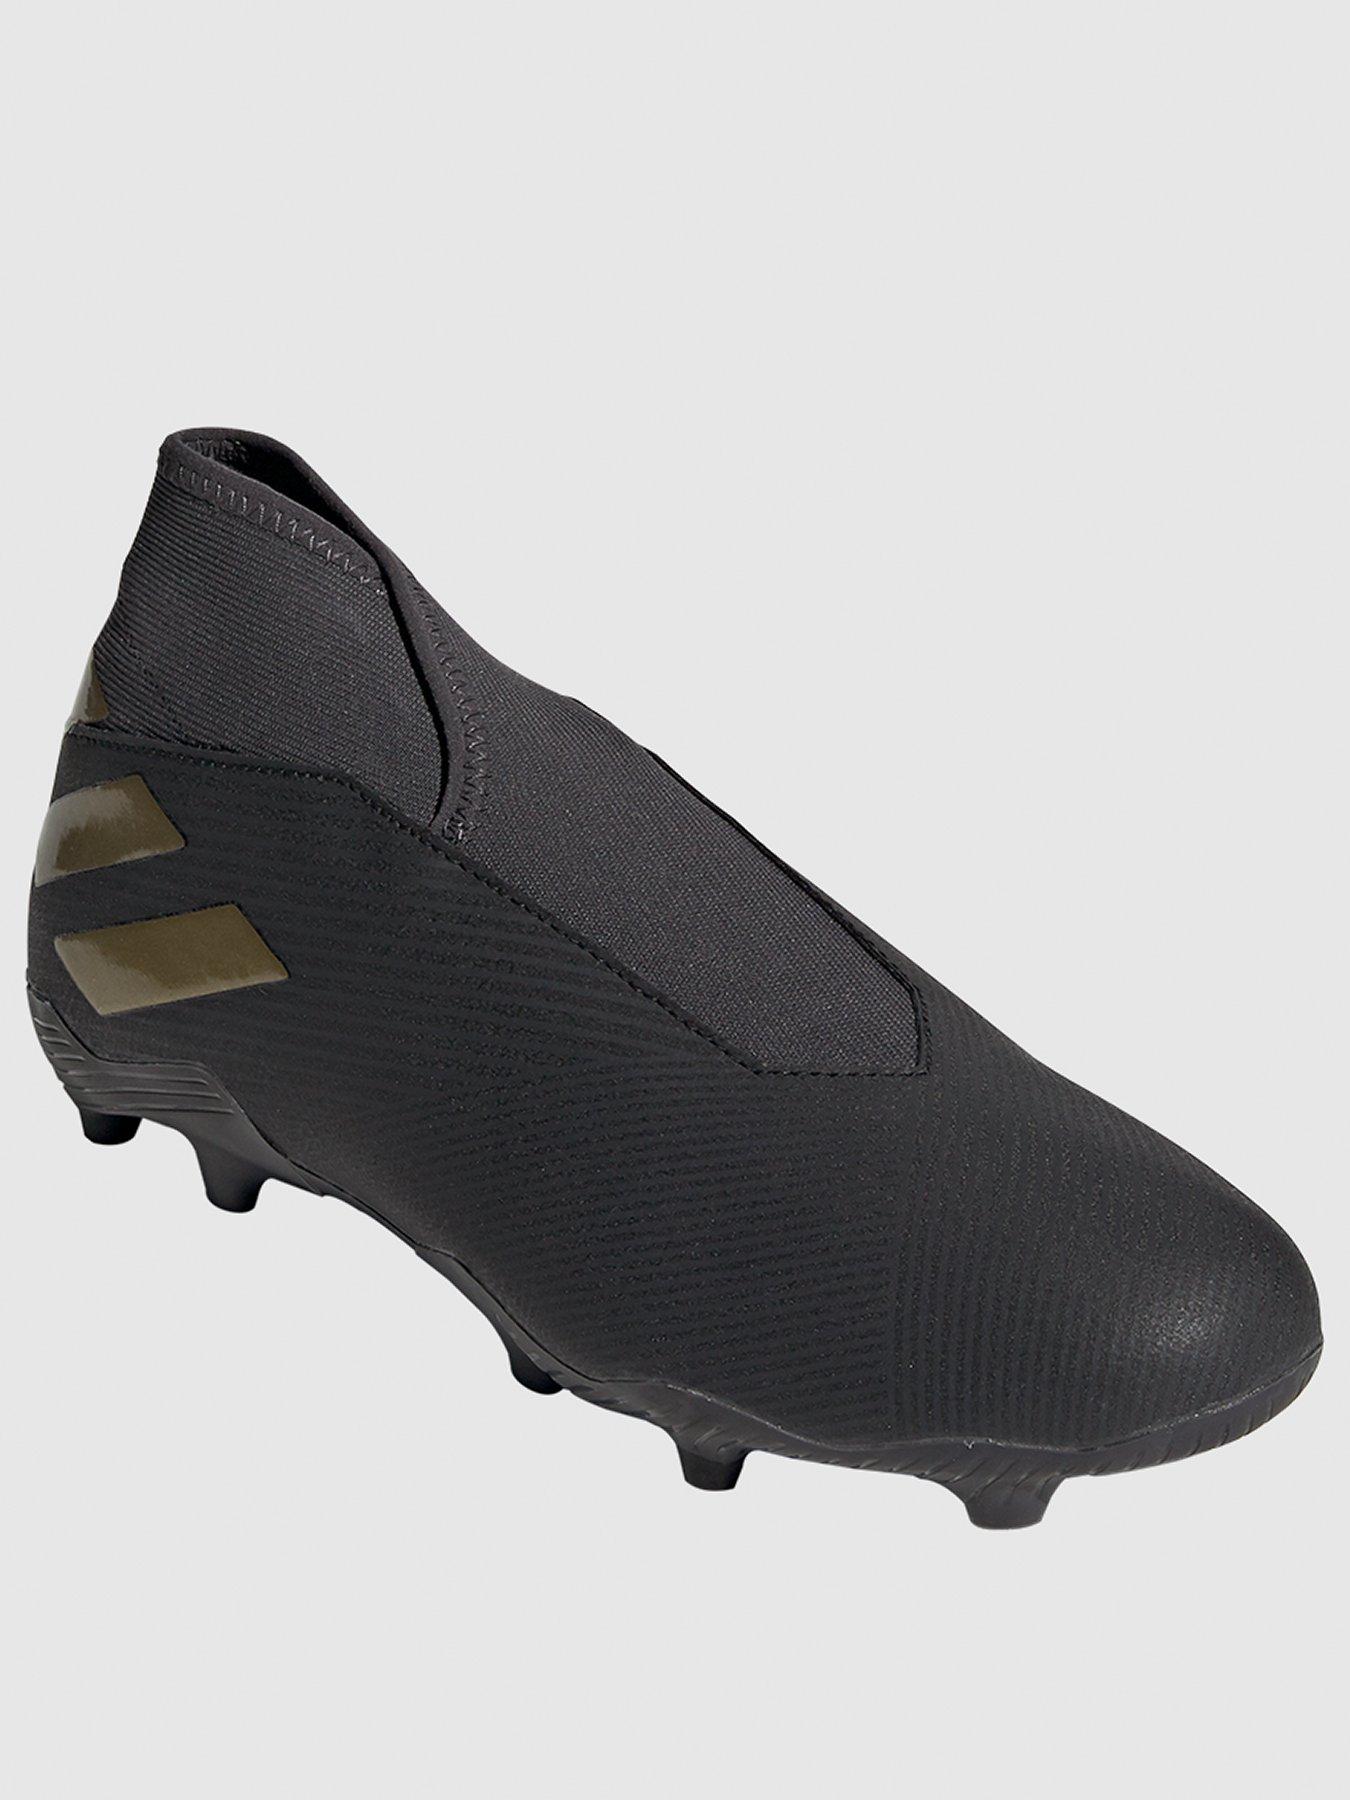 all black laceless football boots